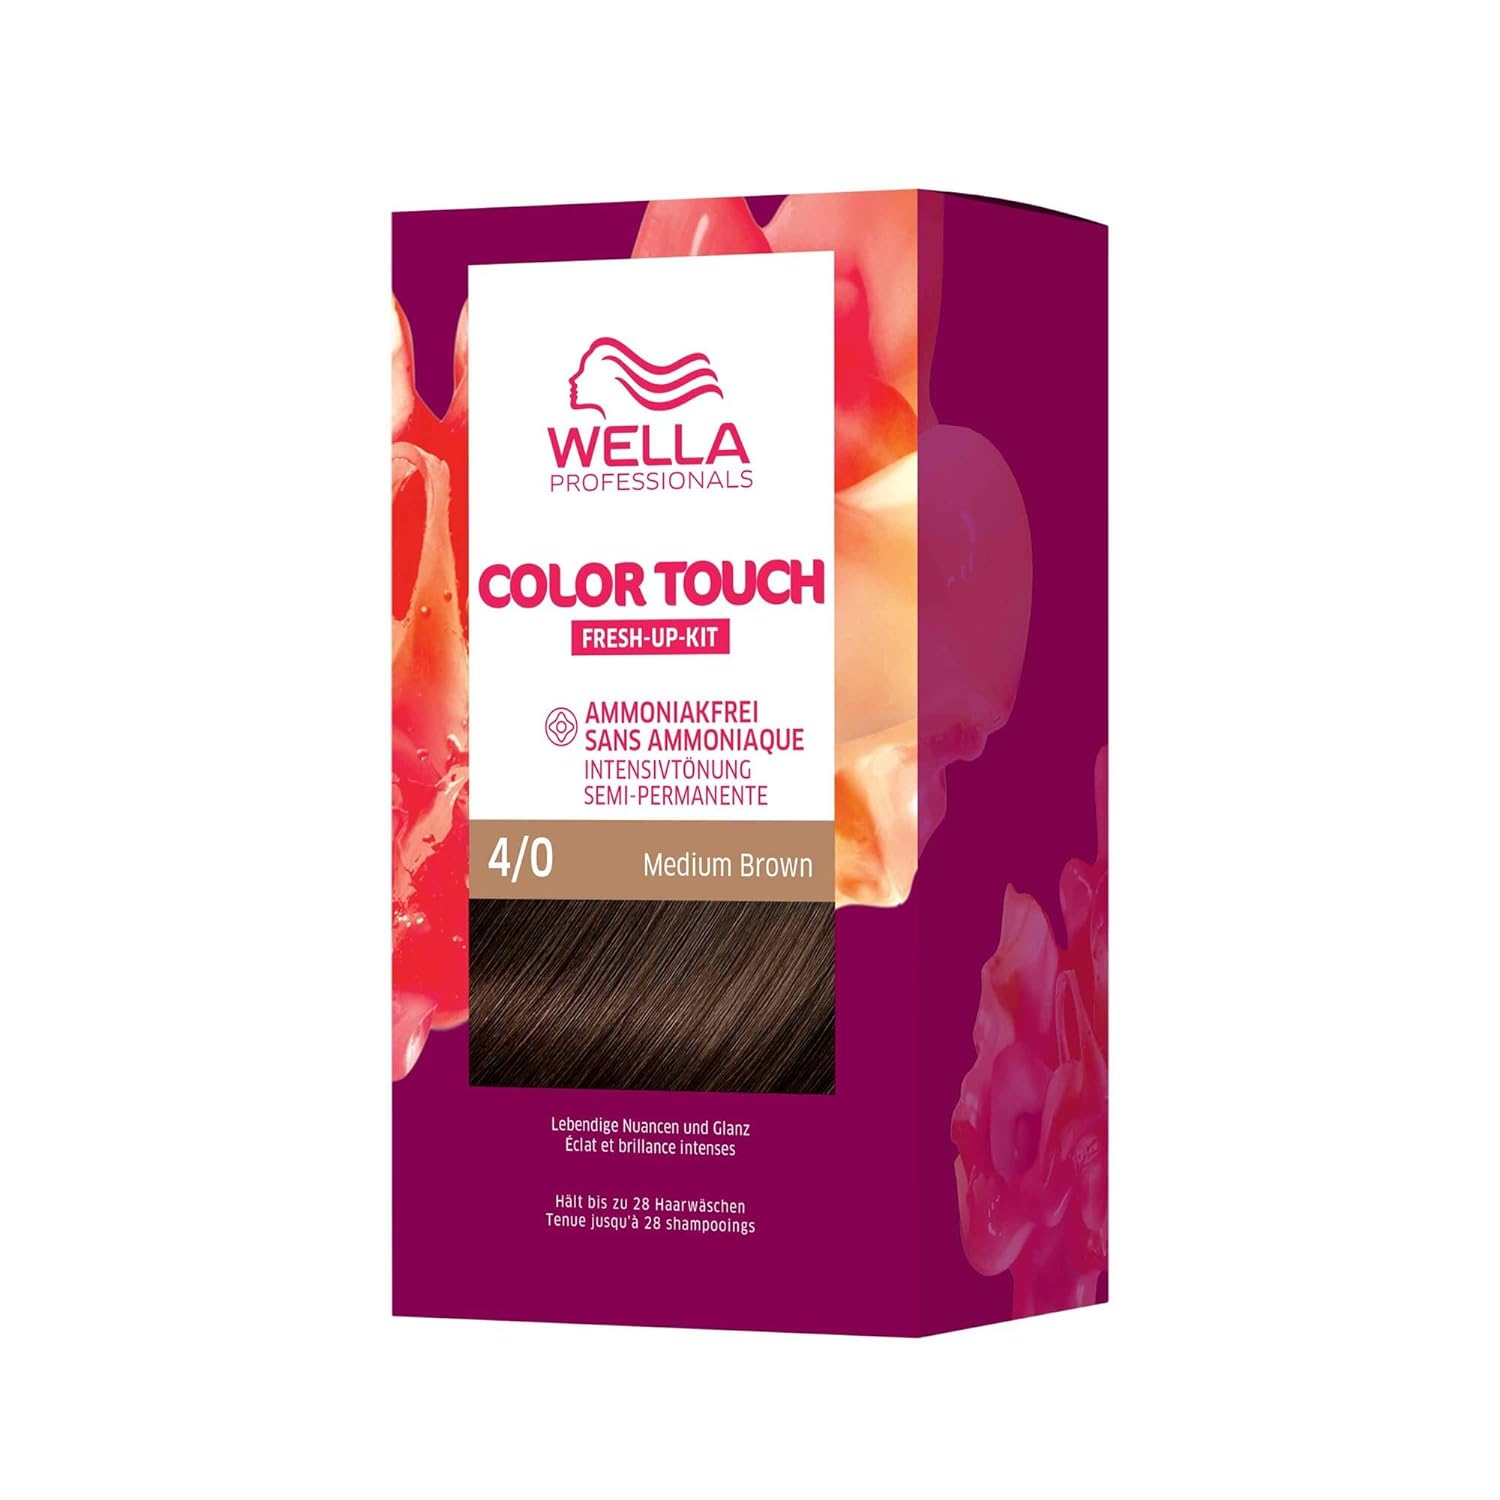 Wella Professionals Color Touch Demi -Permanent Hair Color Without Ammonia - Hair Dye for Color Refreshing and Gray Hair Coverage - Root Kit Including Hair Mask